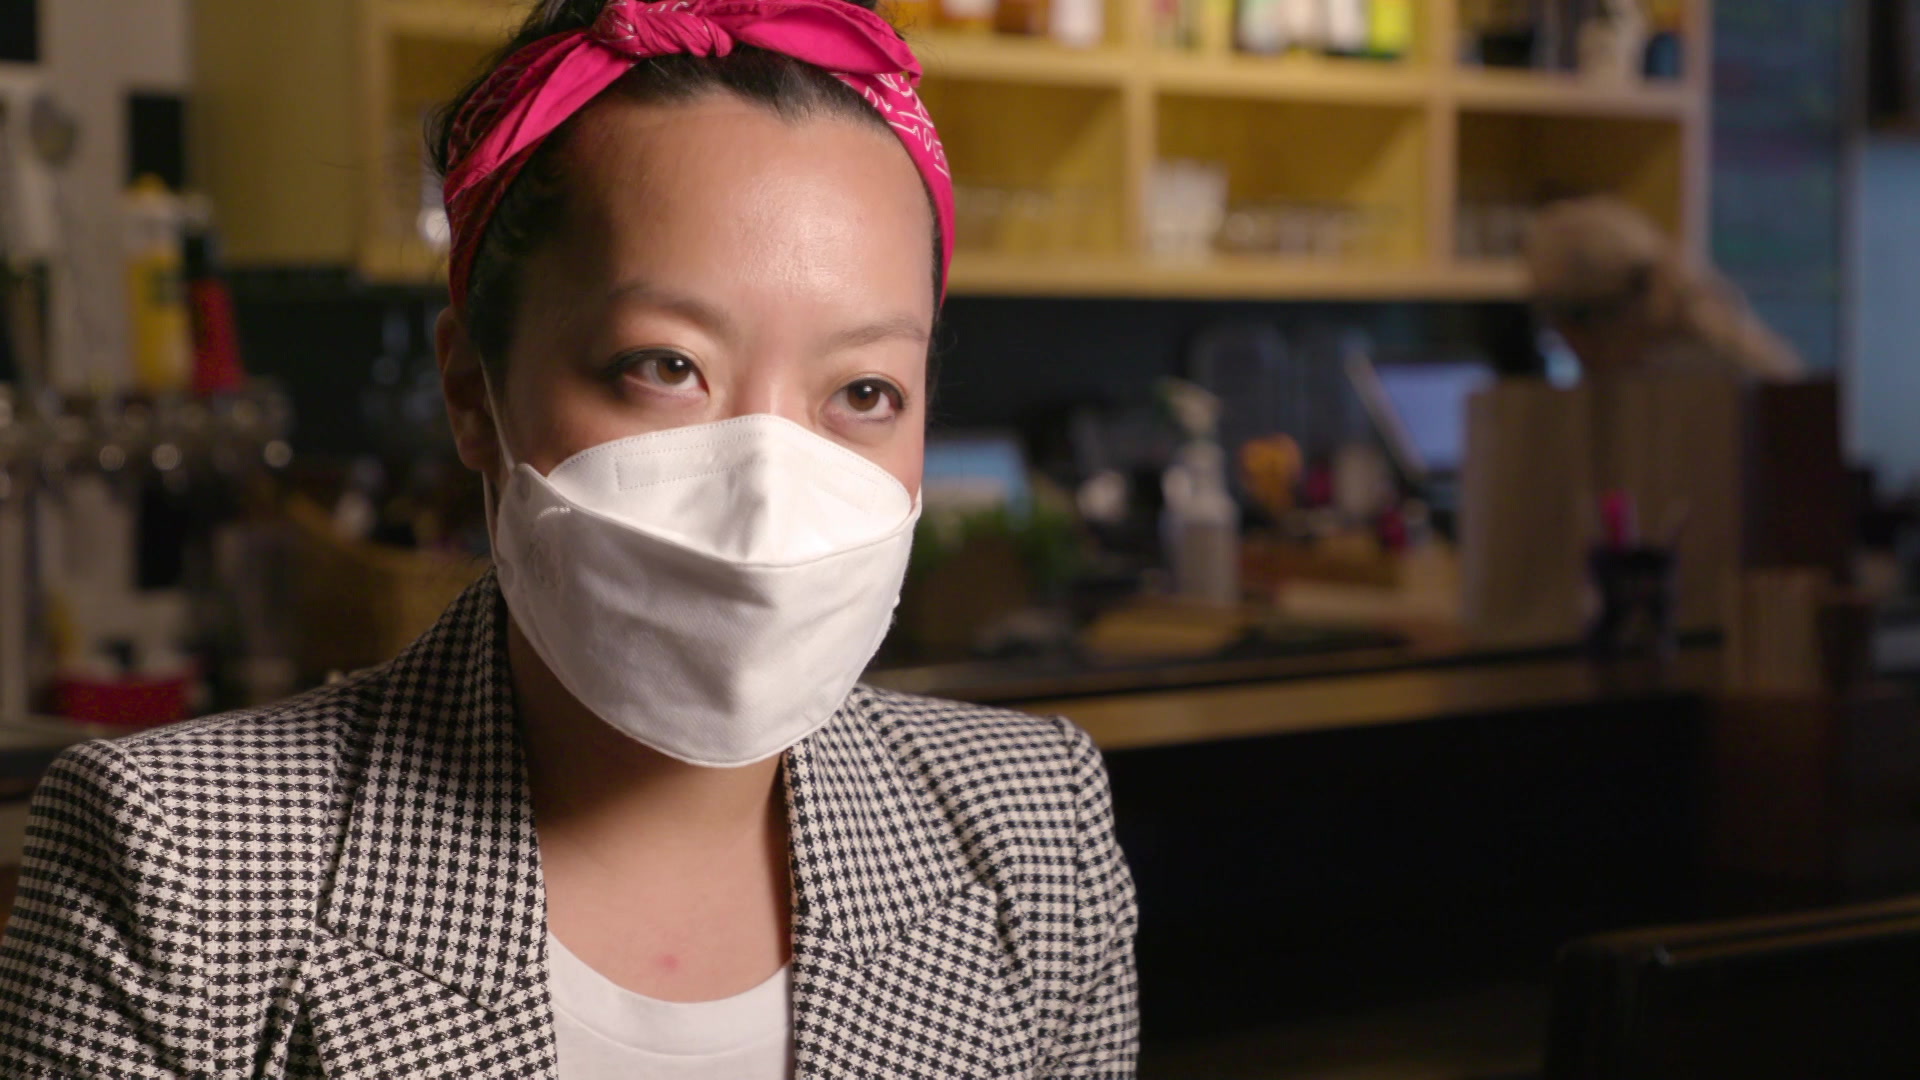 A portrait of Francesca Hong, wearing a suit and face mask with beer taps and cabinets in the background.